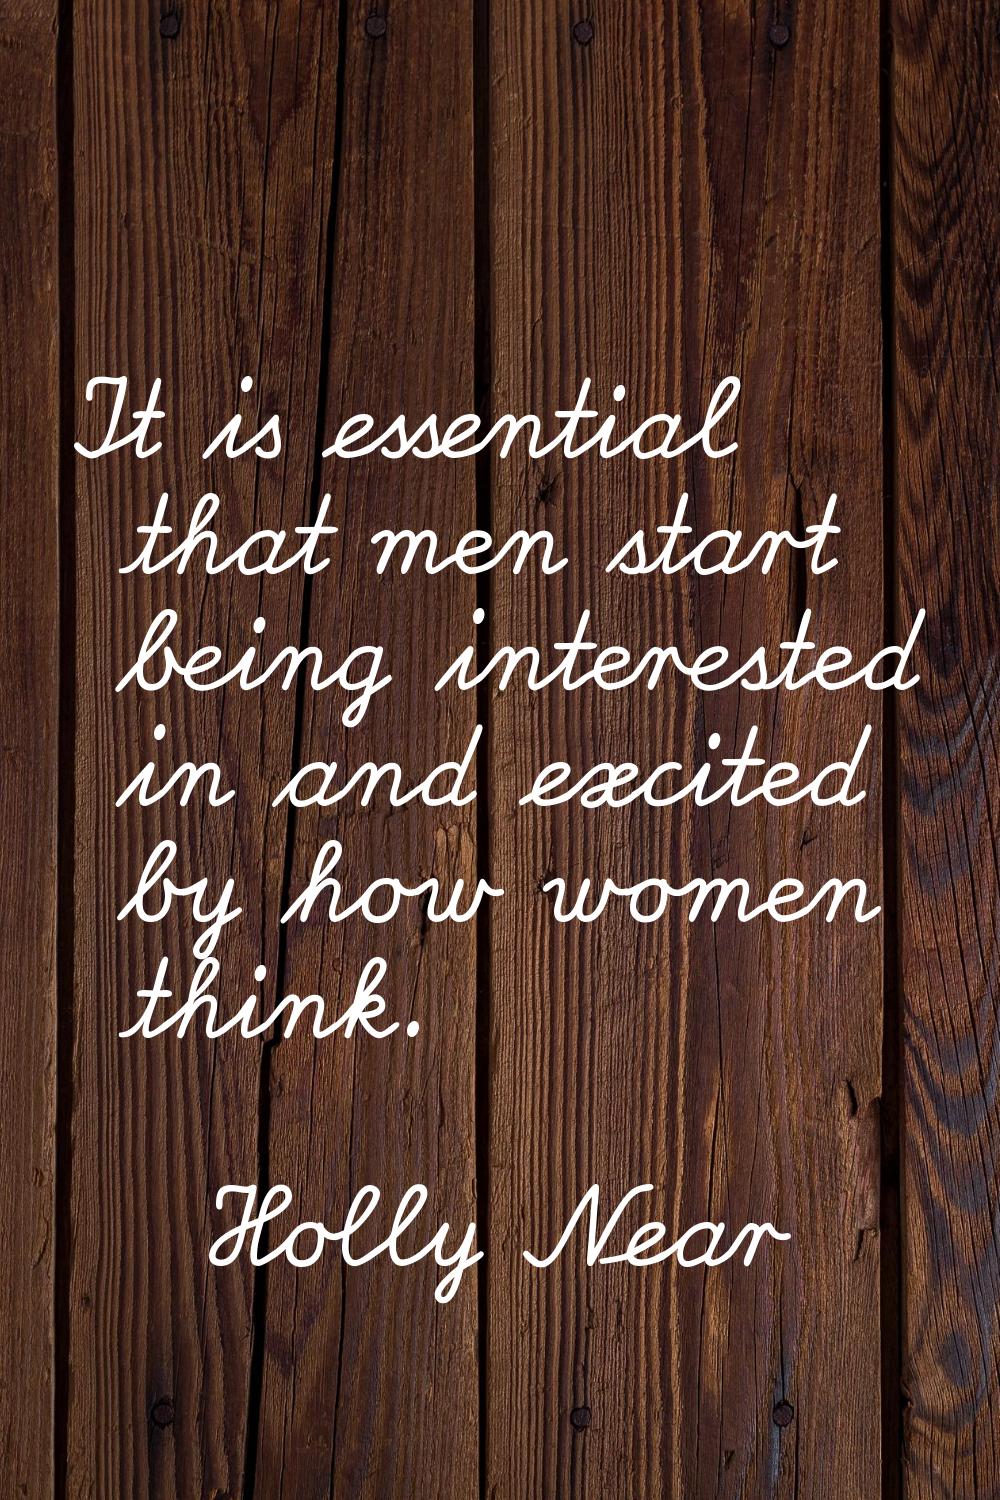 It is essential that men start being interested in and excited by how women think.